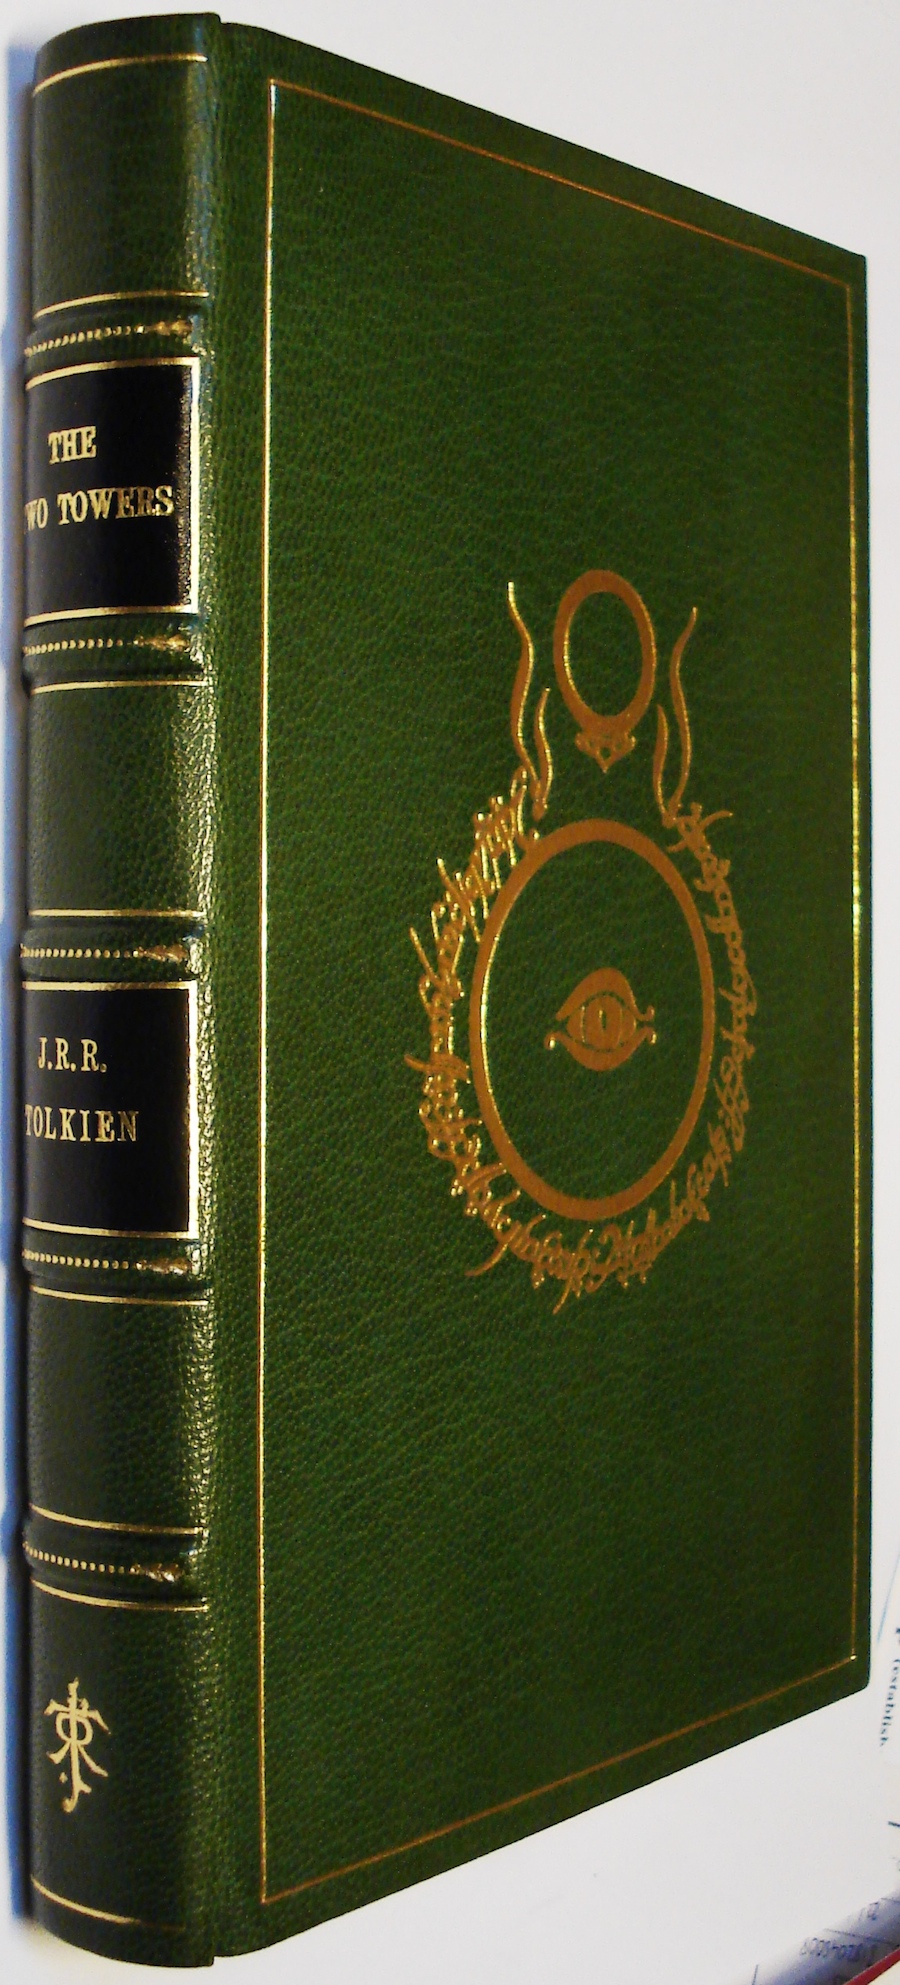 Tolkien, J[ohn] R[onald] R[euel]. The Two Towers First edition, first Impression. George Allen & Unwin Ltd, 1954, 353pp